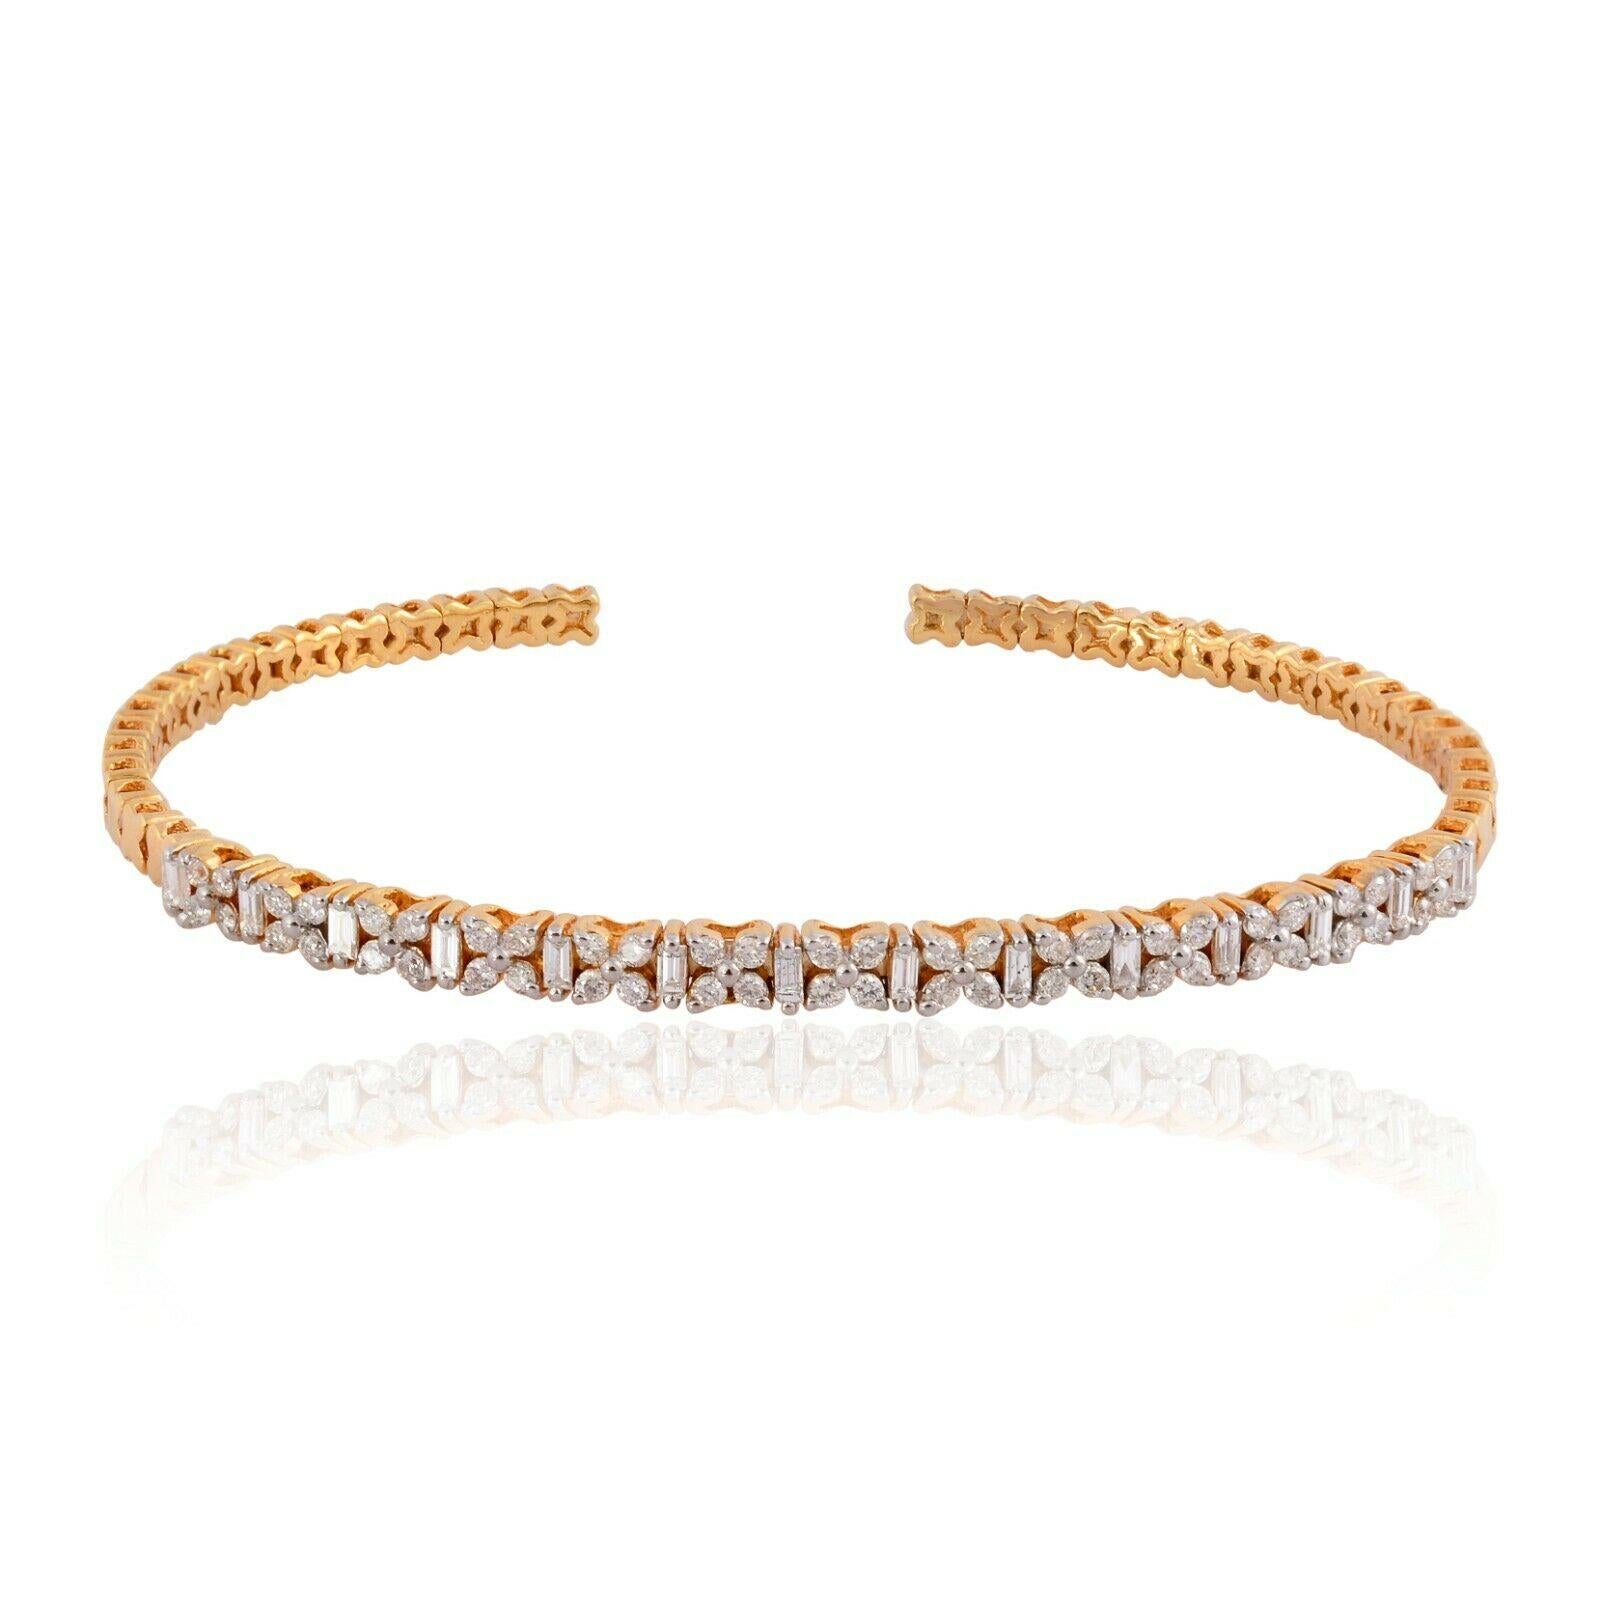 Cast from 14-karat yellow gold, this bracelet is hand set with .85 carats of sparkling diamonds. Available in yellow, rose and white gold. Stack with your favorite pieces or wear it alone.

FOLLOW MEGHNA JEWELS storefront to view the latest